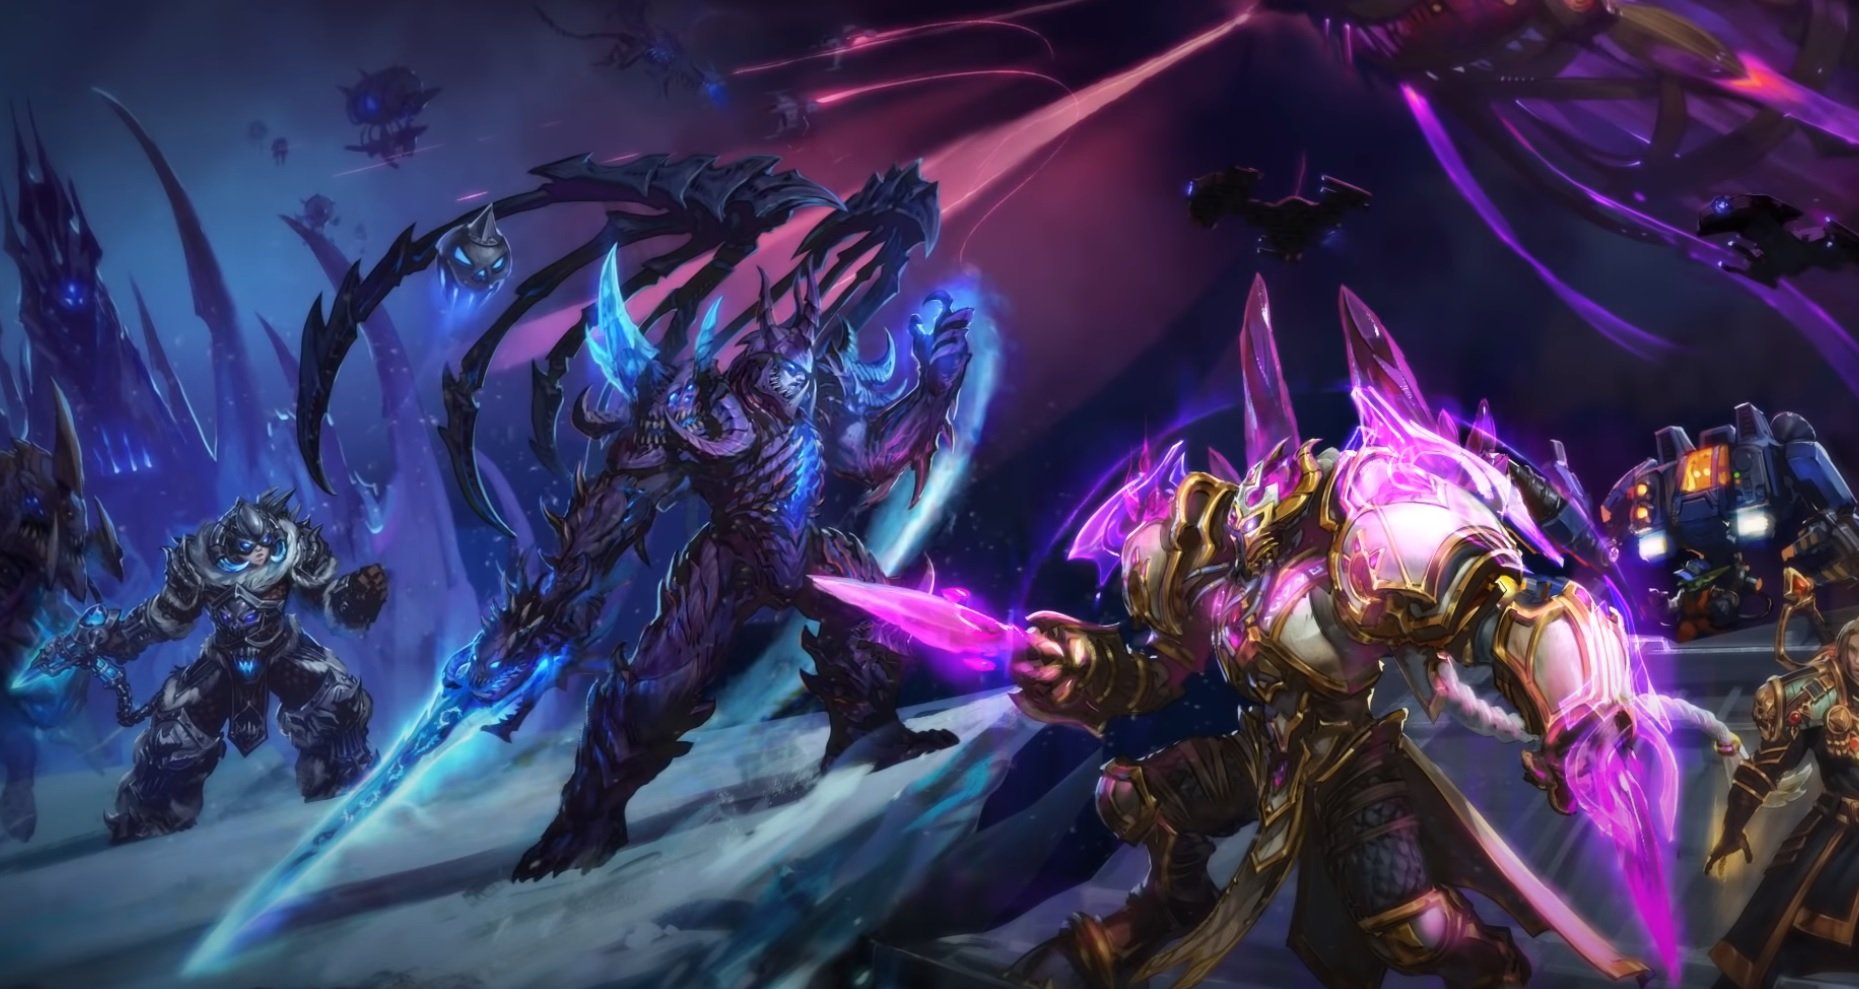 how blizzard ruined their reputation - Blizzard Gives Up On Heroes Of the Storm